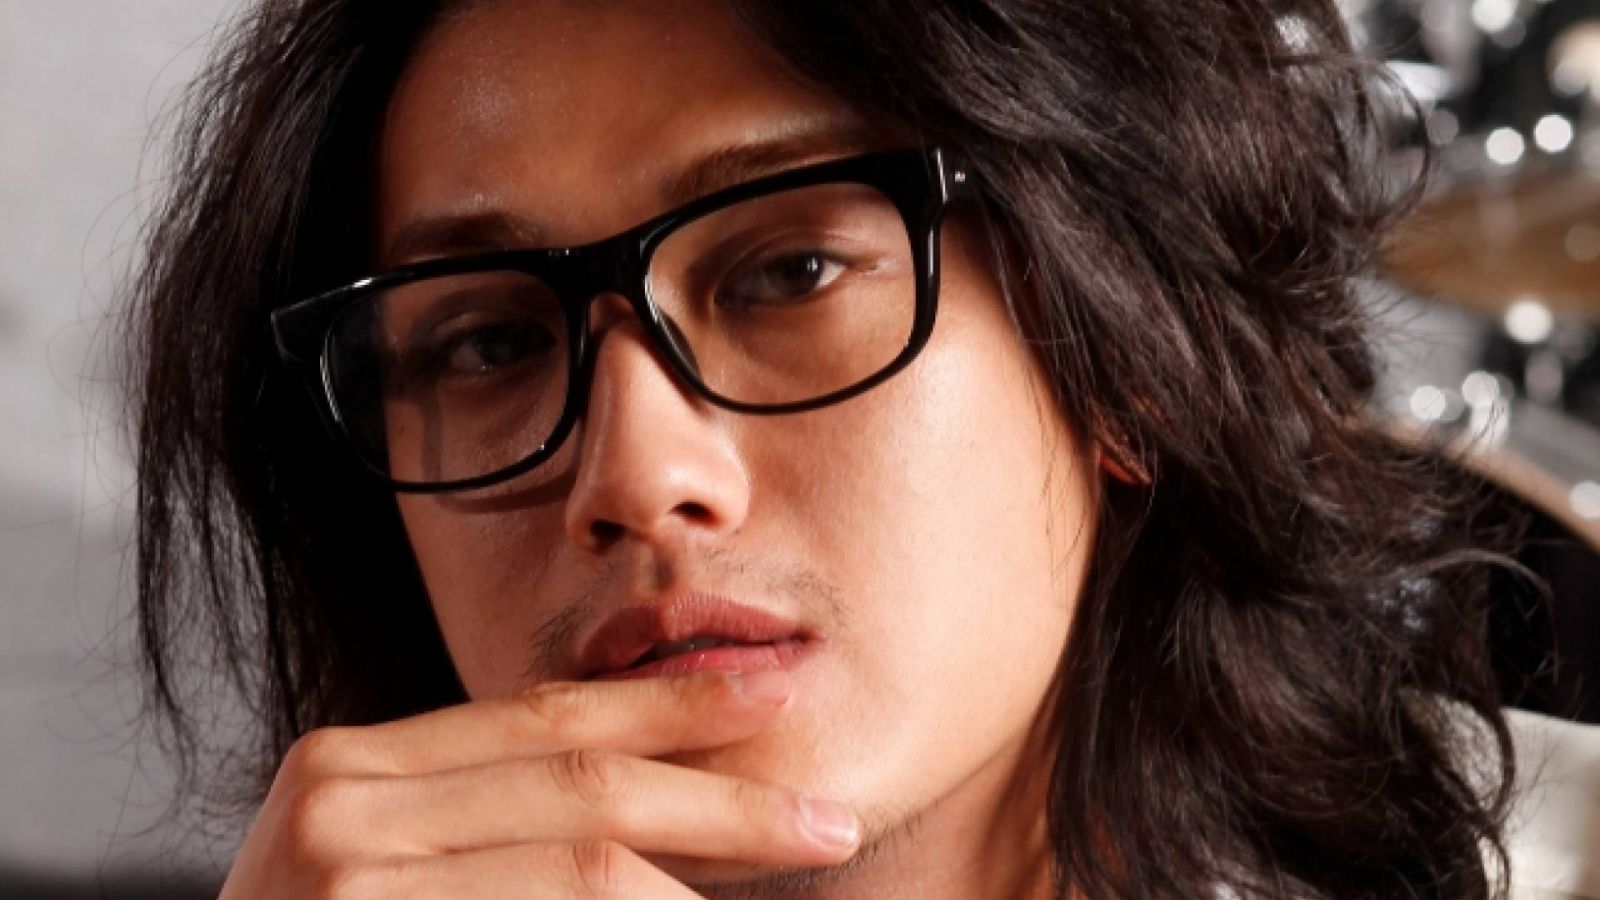 Interview with Jin Akanishi in Los Angeles © Johnny & Associates